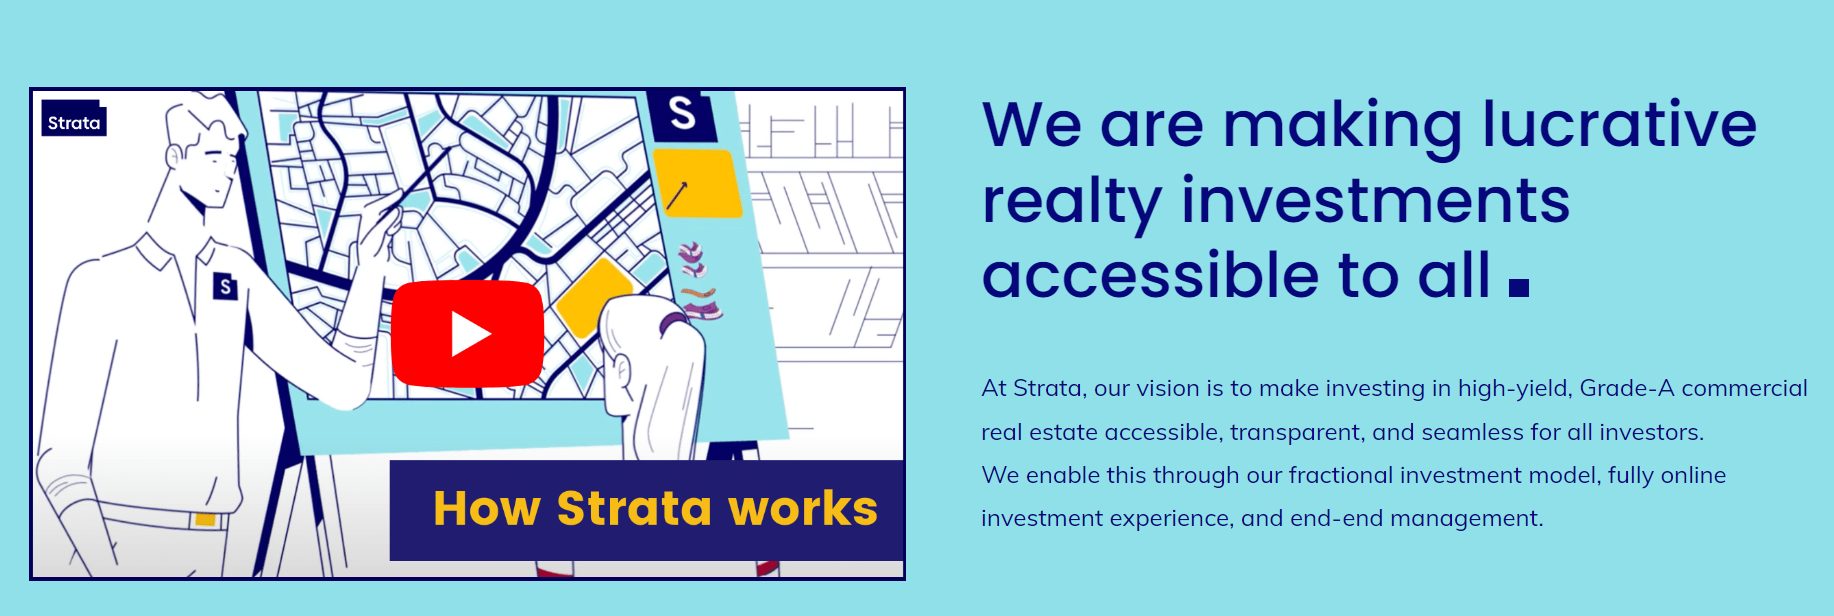 Strata launches new grade-A office asset opportunity in Chennai; aims to raise INR 27 crore from investors decoding=